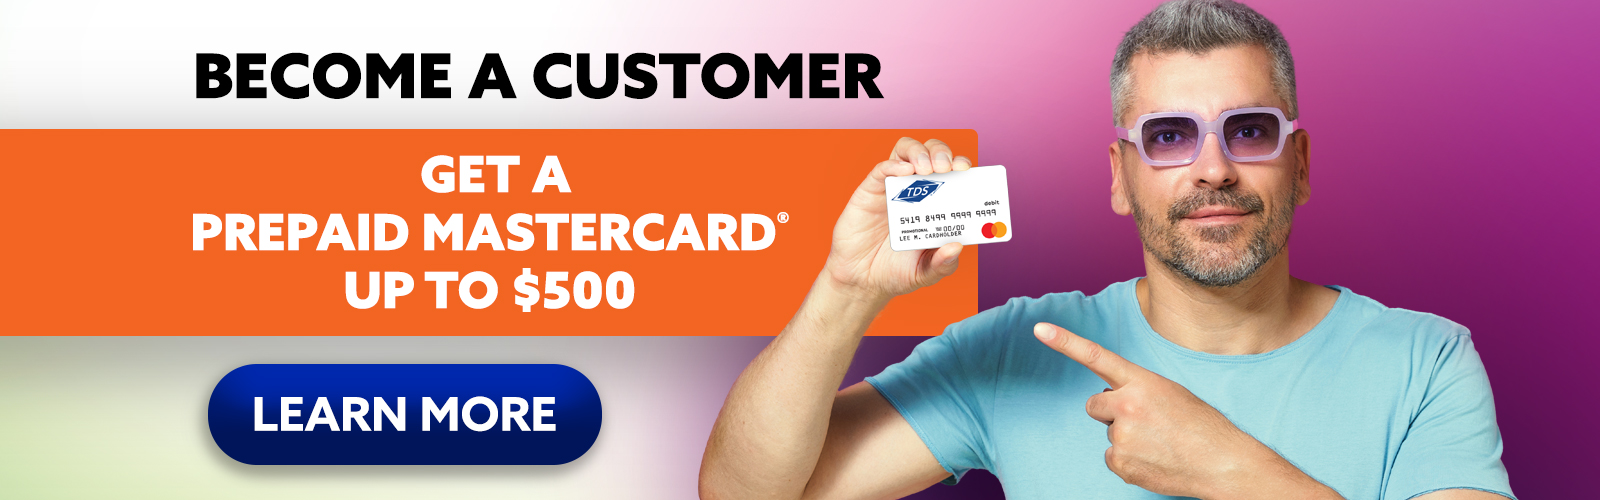 Add TDS TV+ and get a prepaid Mastercard up to $200. Click to learn more!